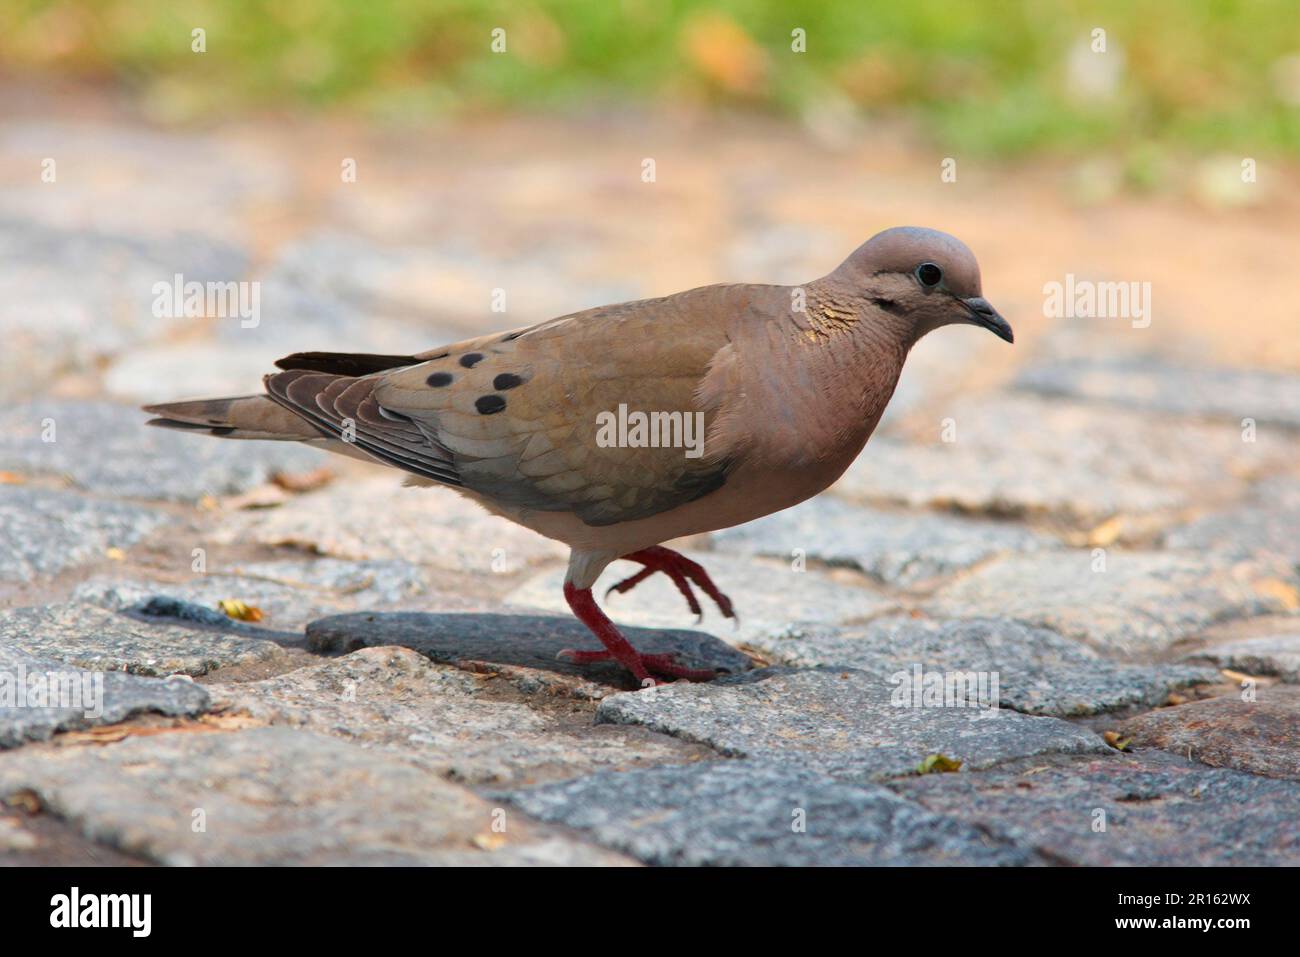 Eared dove (Zenaida auriculata), Eared doves, pigeons, animals, birds, Eared Dove adult, walking on cobbled road, Buenos Aires, Argentina Stock Photo